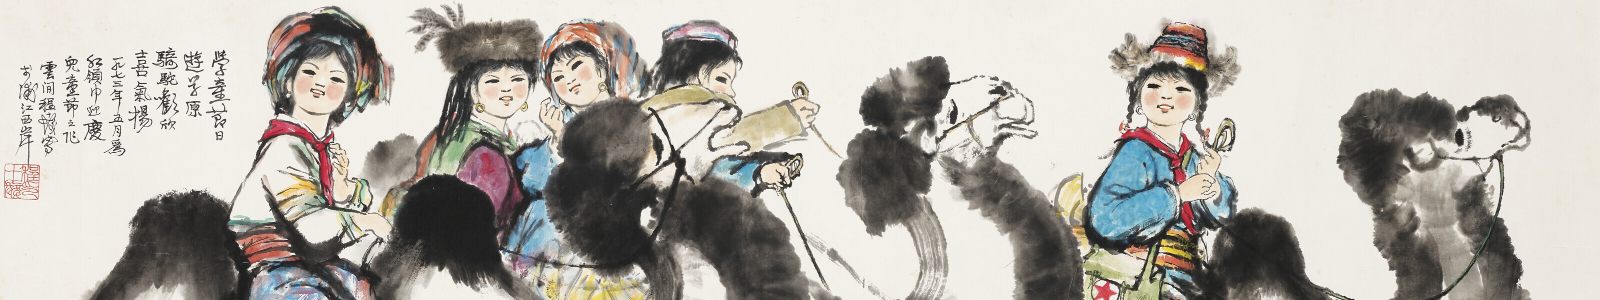 Dawn of Spring: Chinese Paintings Online